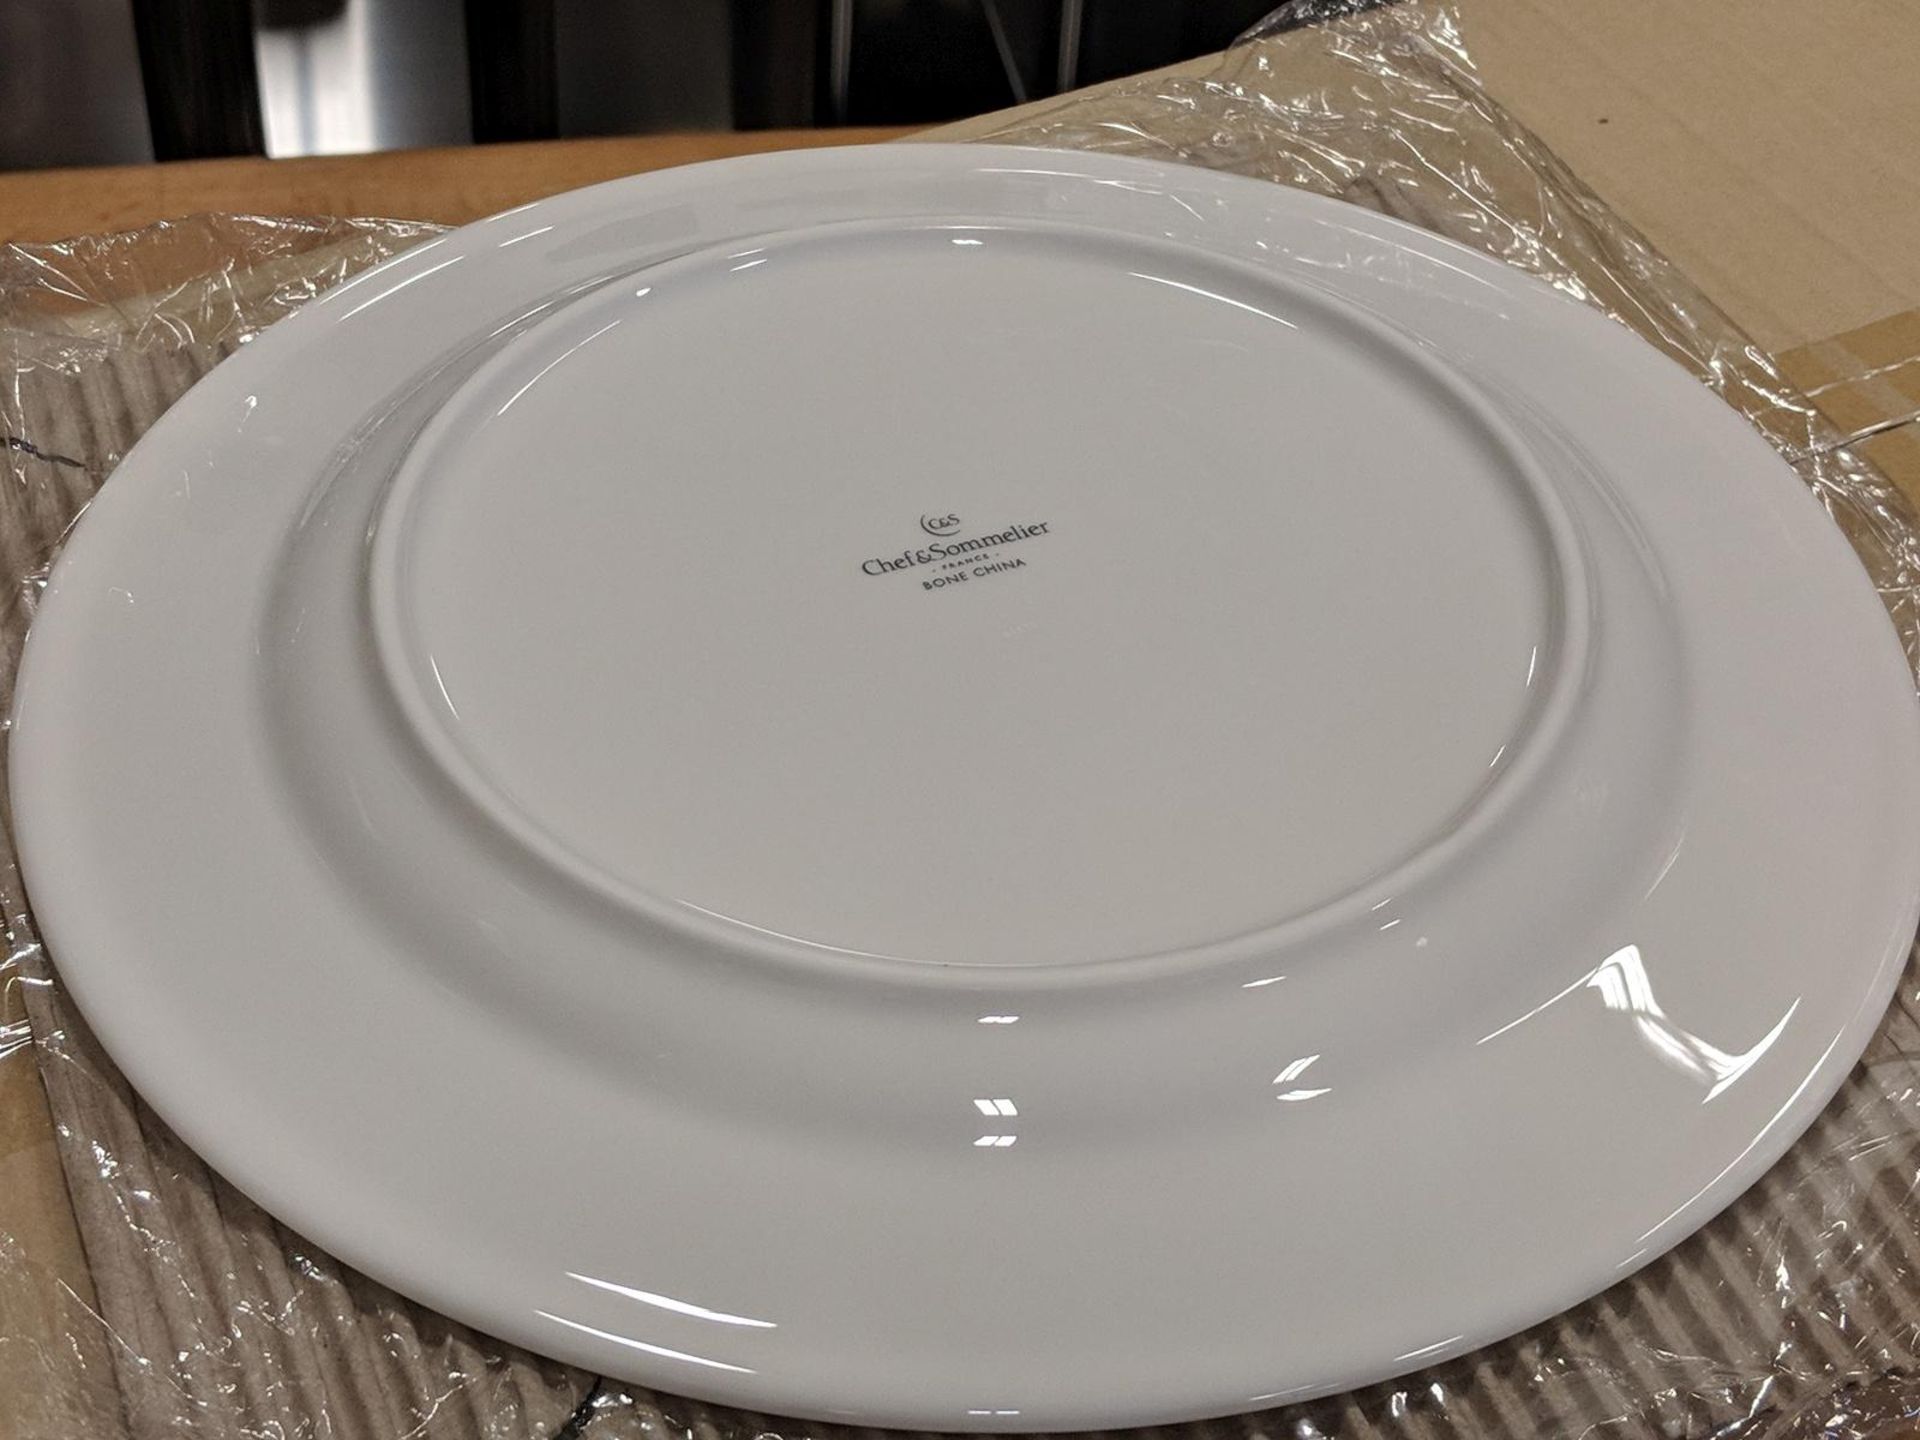 11" Infinity Dinner Plates - Lot of 12 (1 Case), Arcoroc R1002 - Image 2 of 4